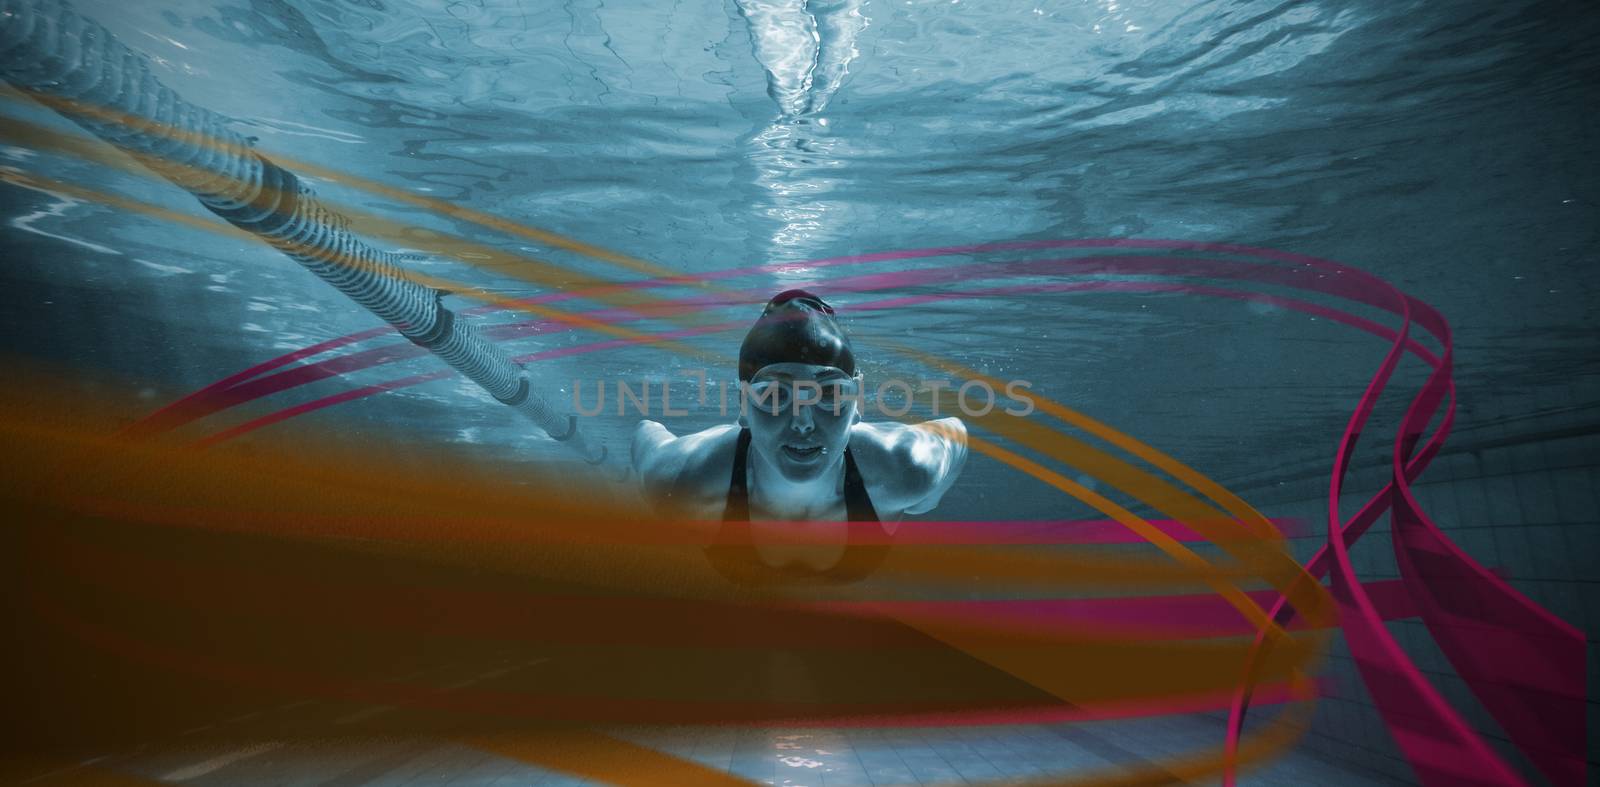 Athletic swimmer training on her own against feet of woman standing on the edge of the pool